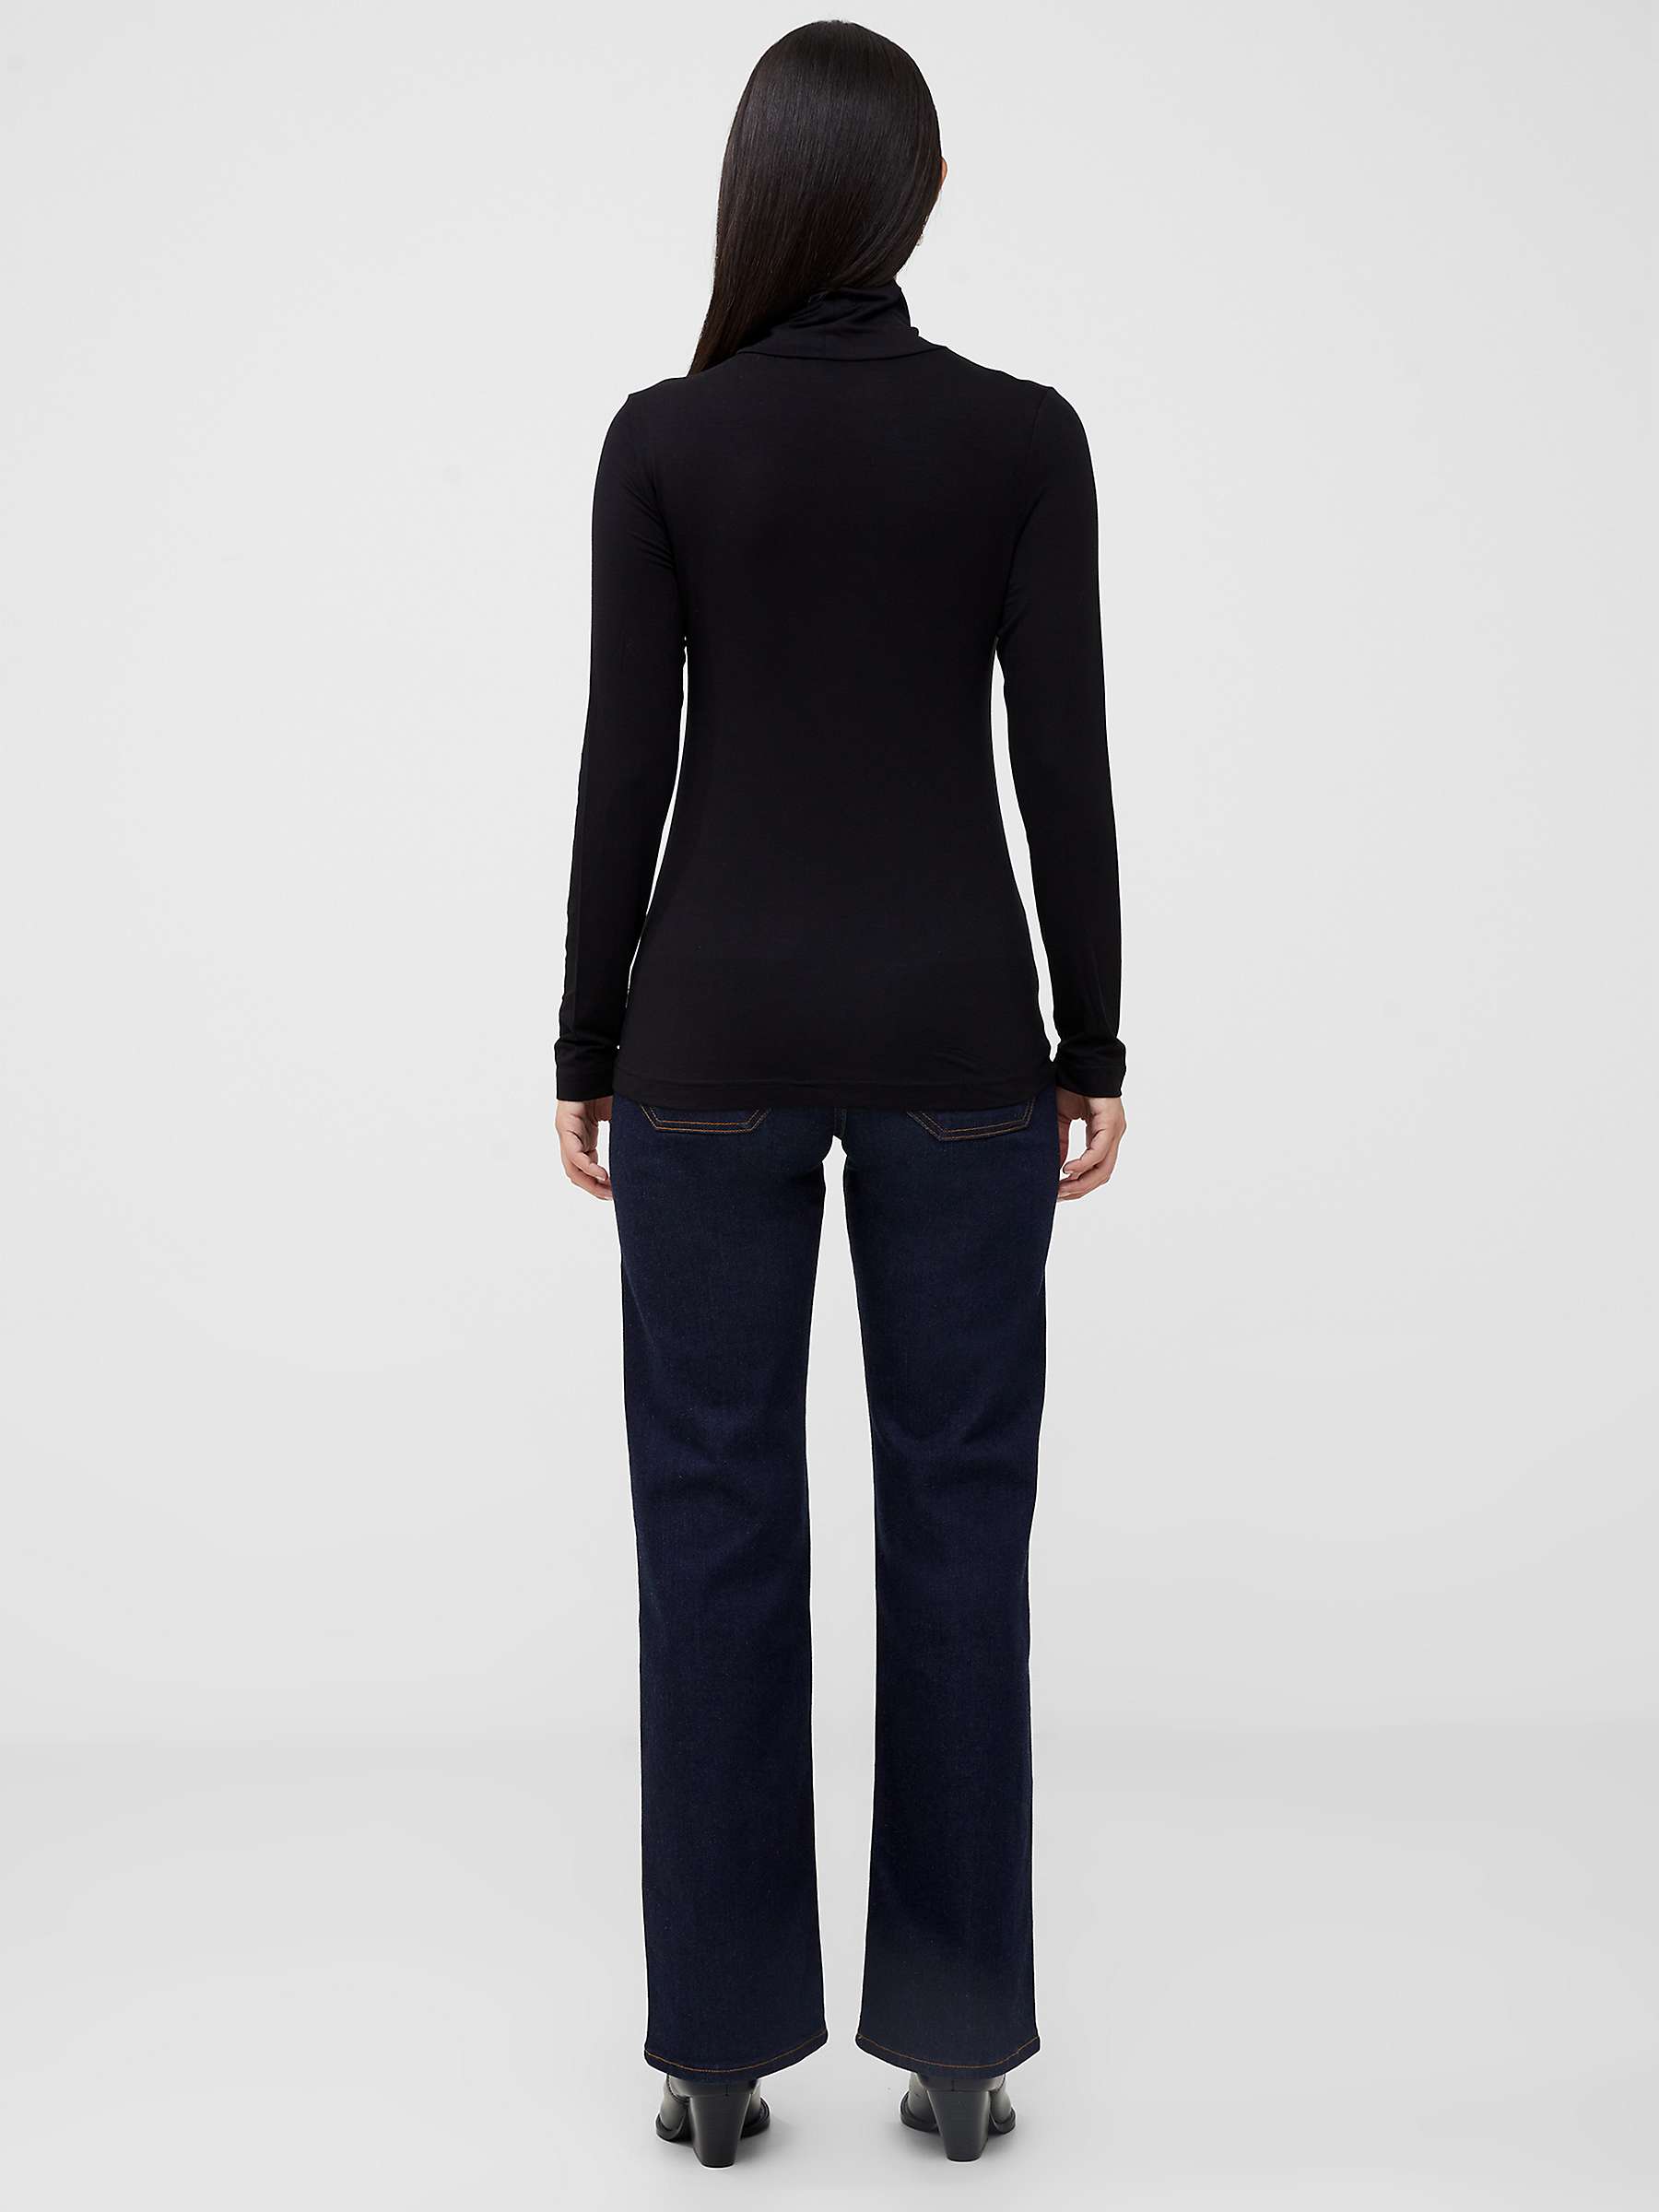 Buy French Connection Venitia Roll Neck Jersey Top Online at johnlewis.com